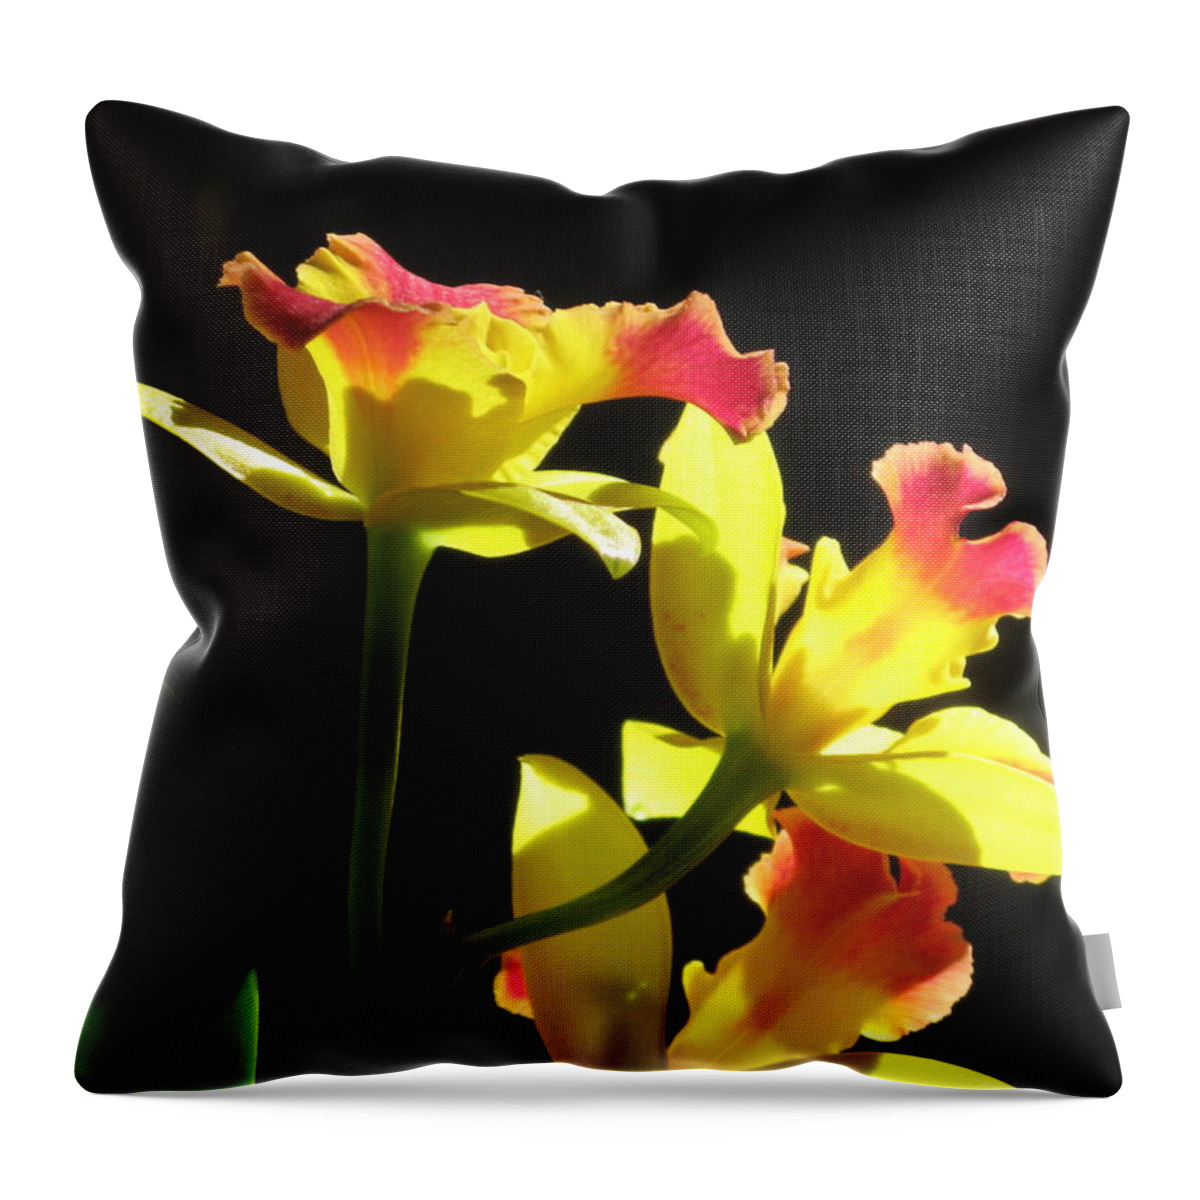 Flower Throw Pillow featuring the photograph Cattleya Orchid #3 by Alfred Ng